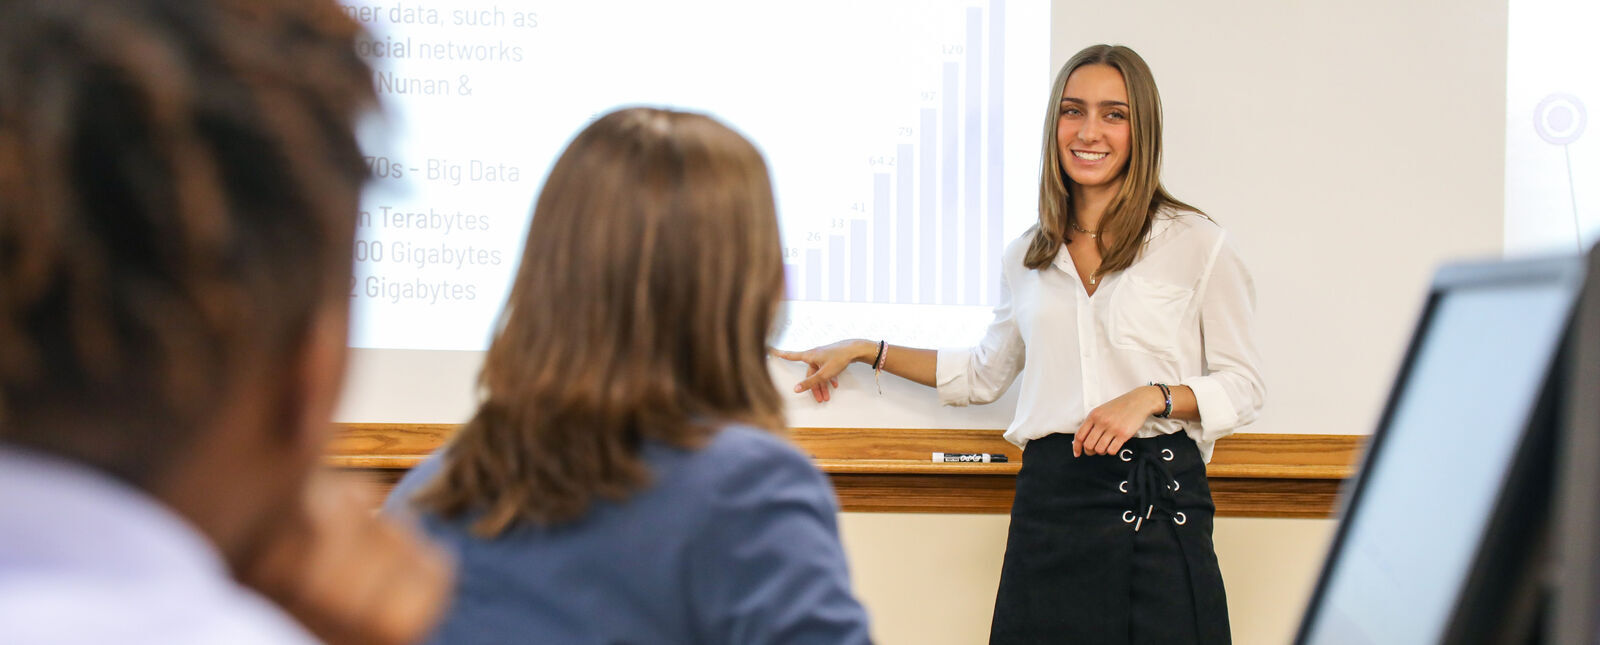 A female student makes a business presentation in a classroom 